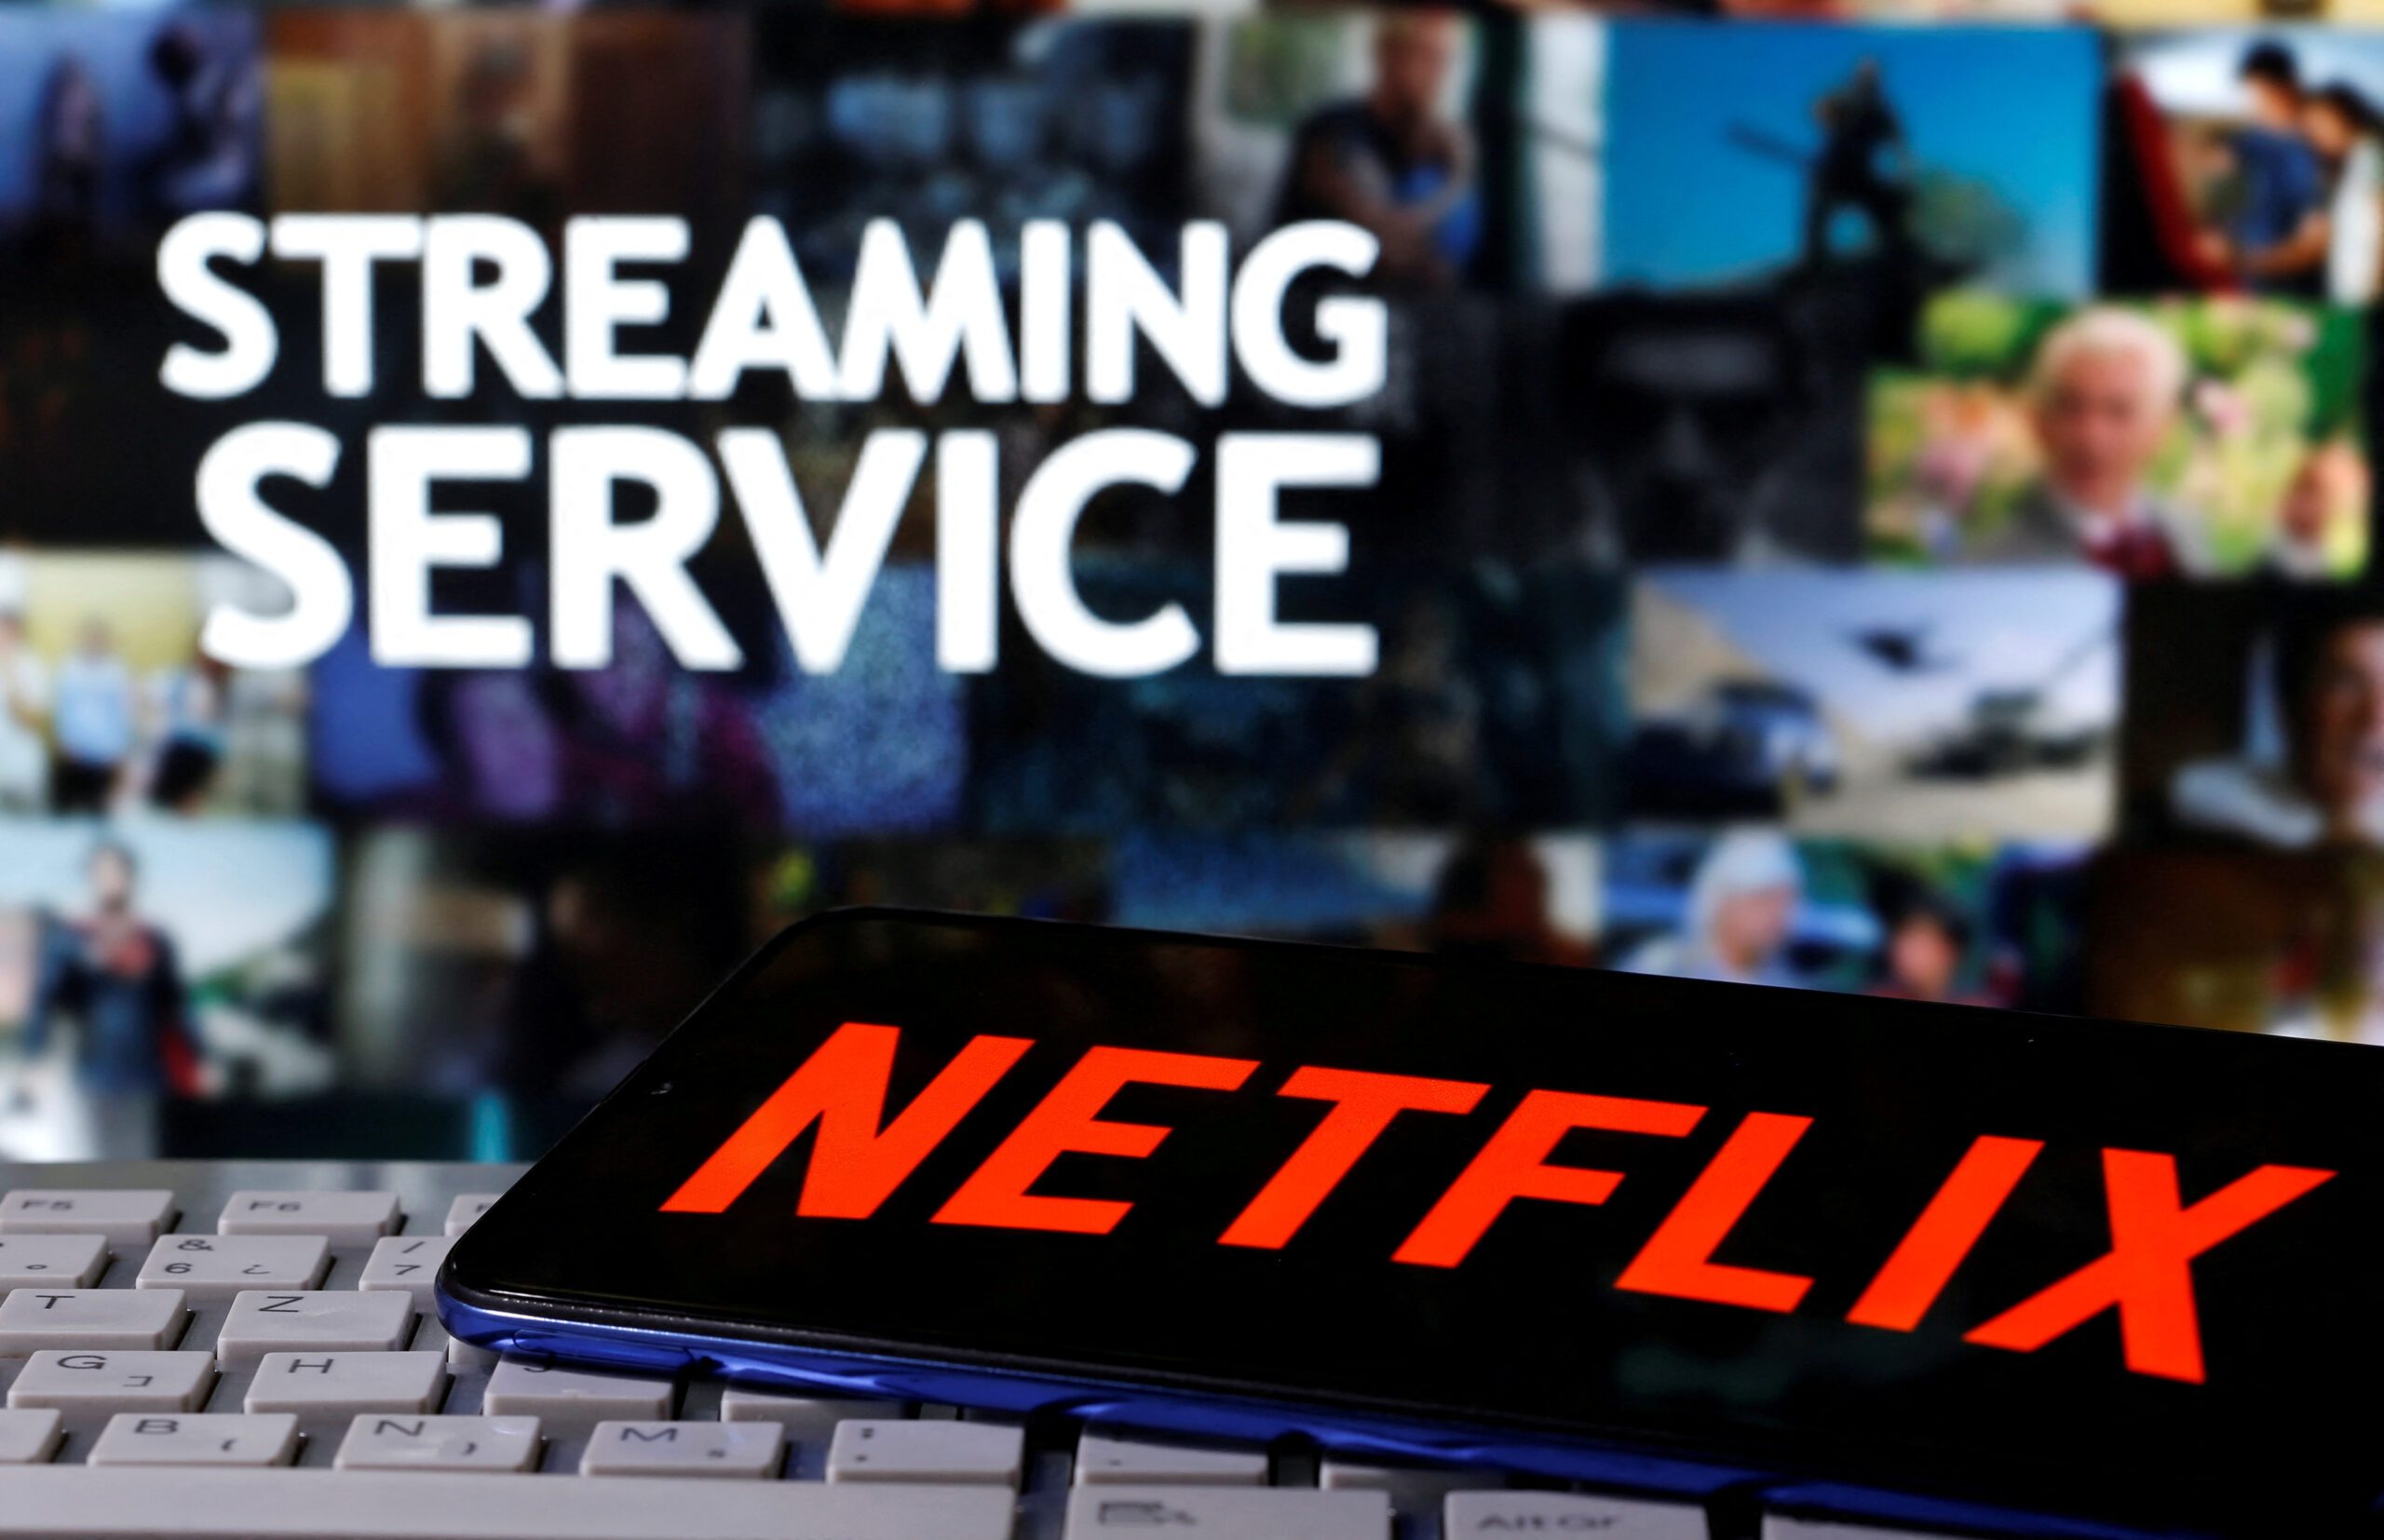 Netflix targets global TV ad market as next business to disrupt